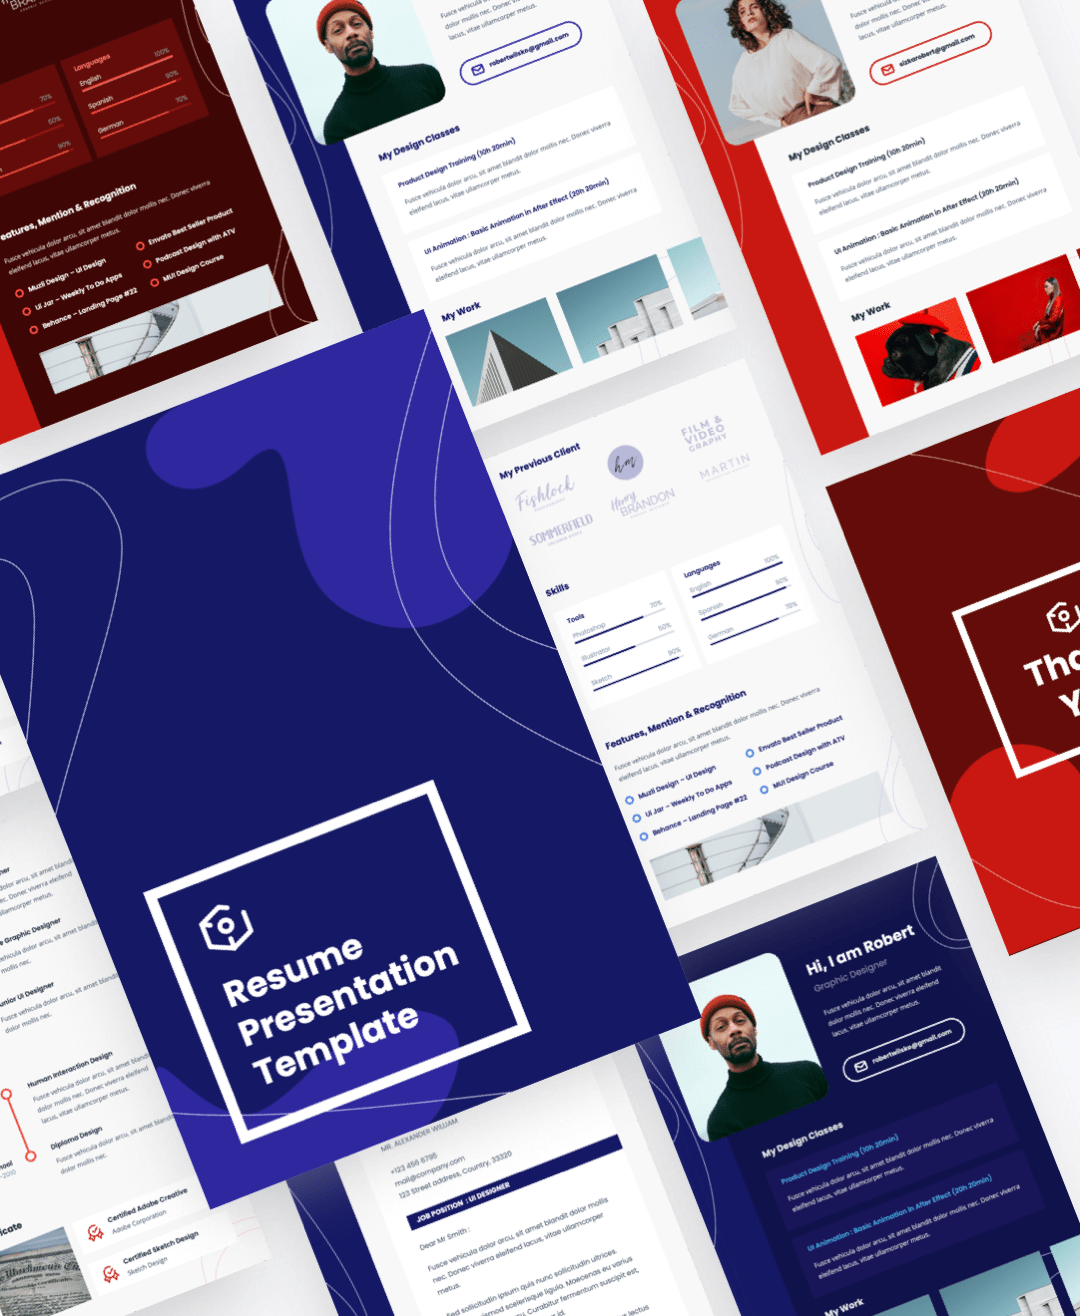 Vertical A4 Resume Keynote Template has a professional, ultra-modern and unique design, it is easy to edit, what you need is a Mac. It offers 2 color schema: blue and red.